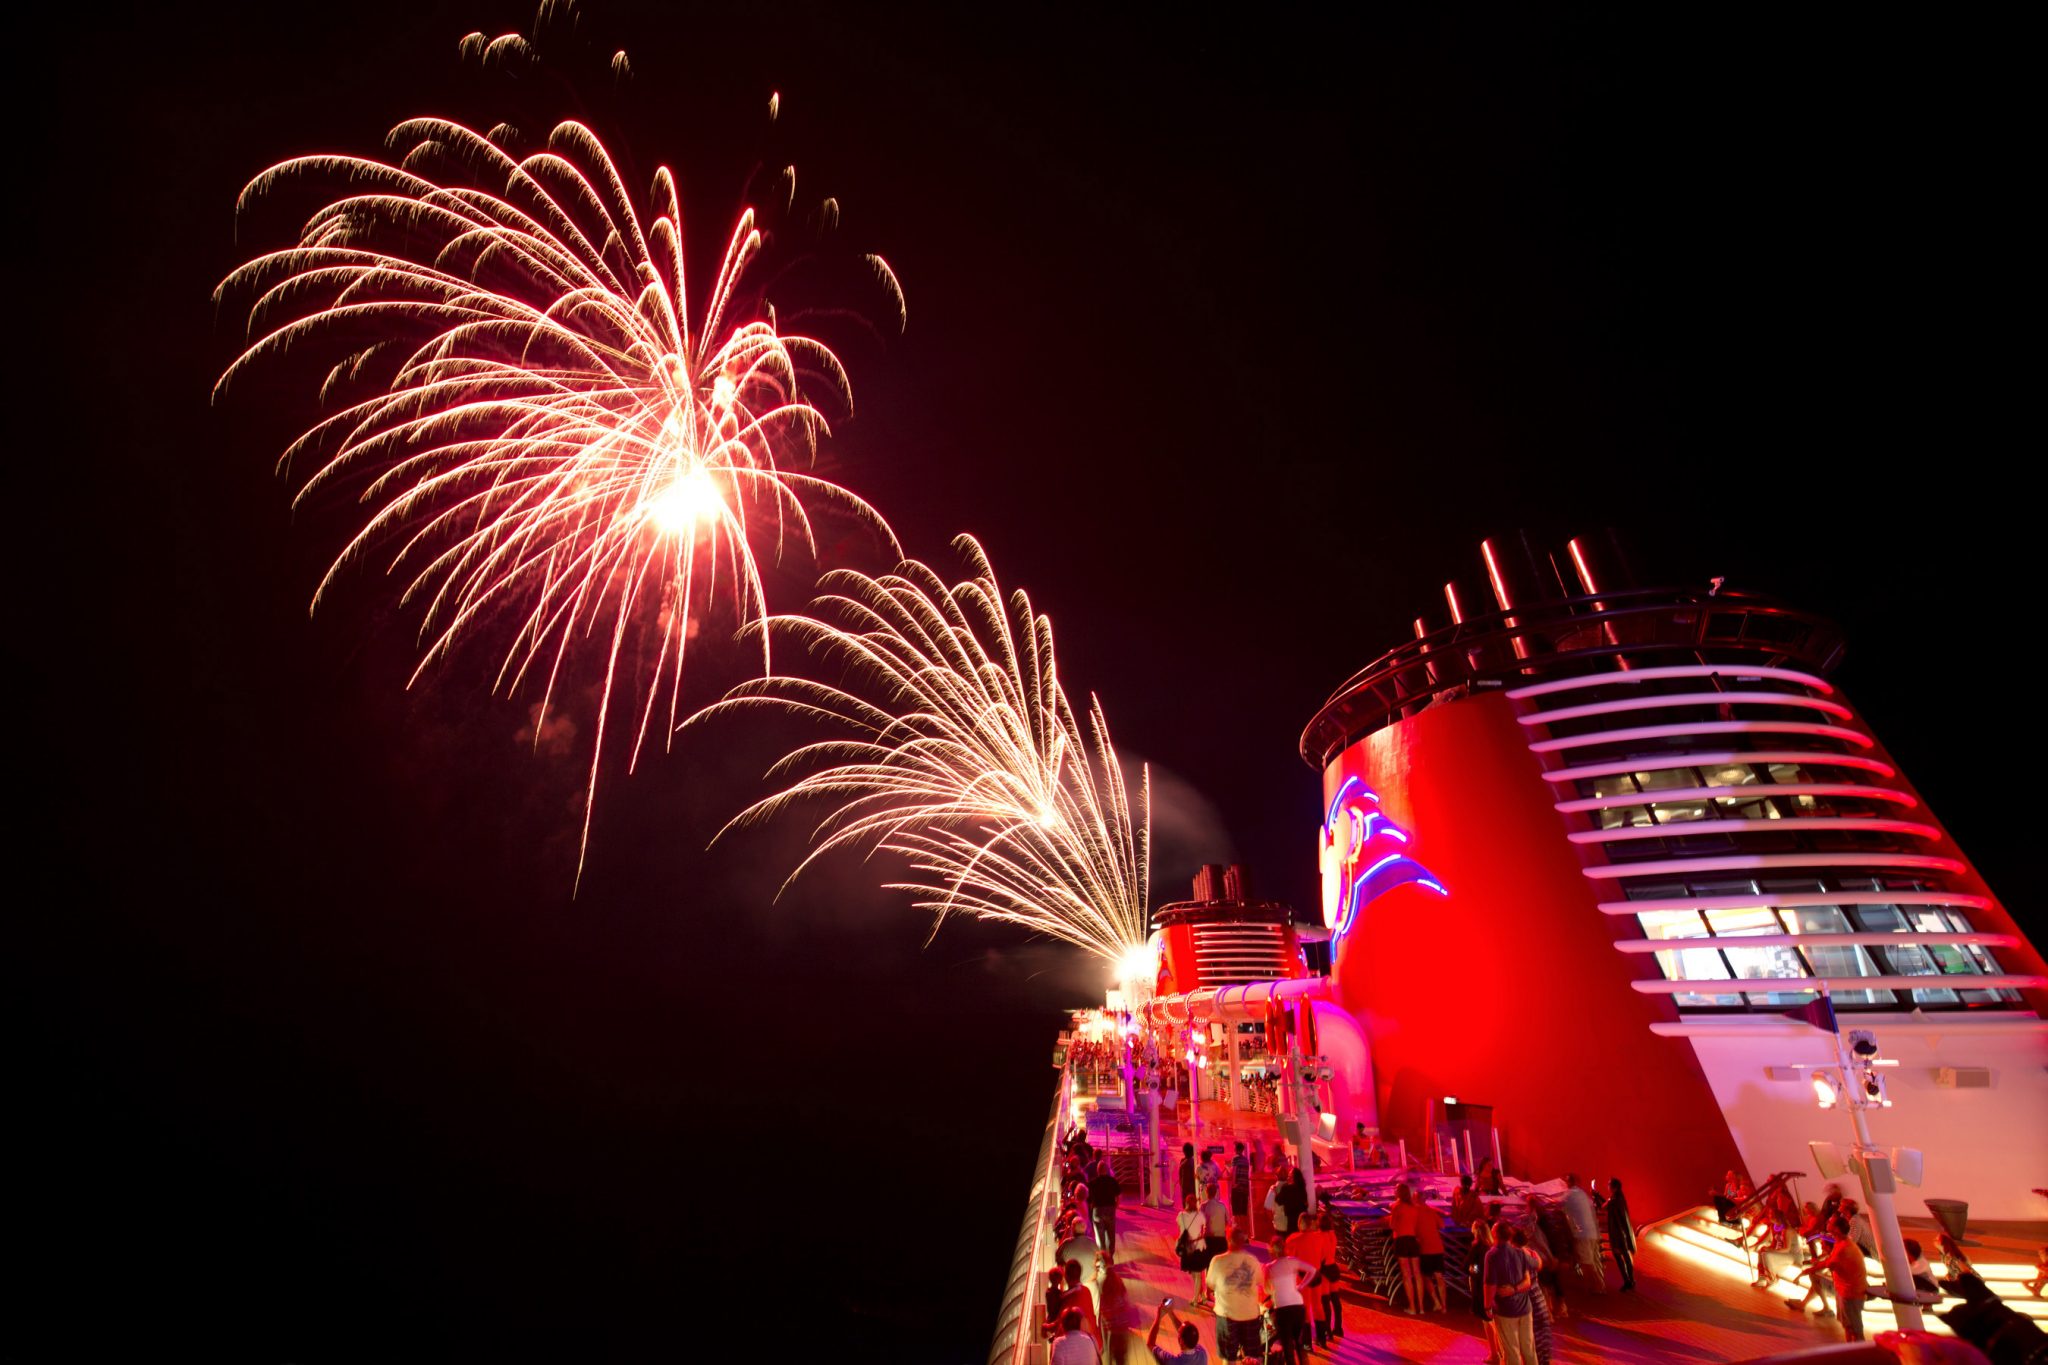 Top 10 Things to Do on Disney Fantasy featured by top US Disney blogger, Marcie and the Mouse: Disney Cruise Line lights up the sky to dazzle guests with the largest, awe-inspiring fireworks extravaganza presented aboard a cruise ship. The skies above the Disney Fantasy and the Disney Dream explode with brilliant colors during “Buccaneer Blast!” – a pyrotechnic spectacular choreographed to a dramatic score featuring songs from the “Pirates of the Caribbean” movies. (Gregg Newton, photographer)